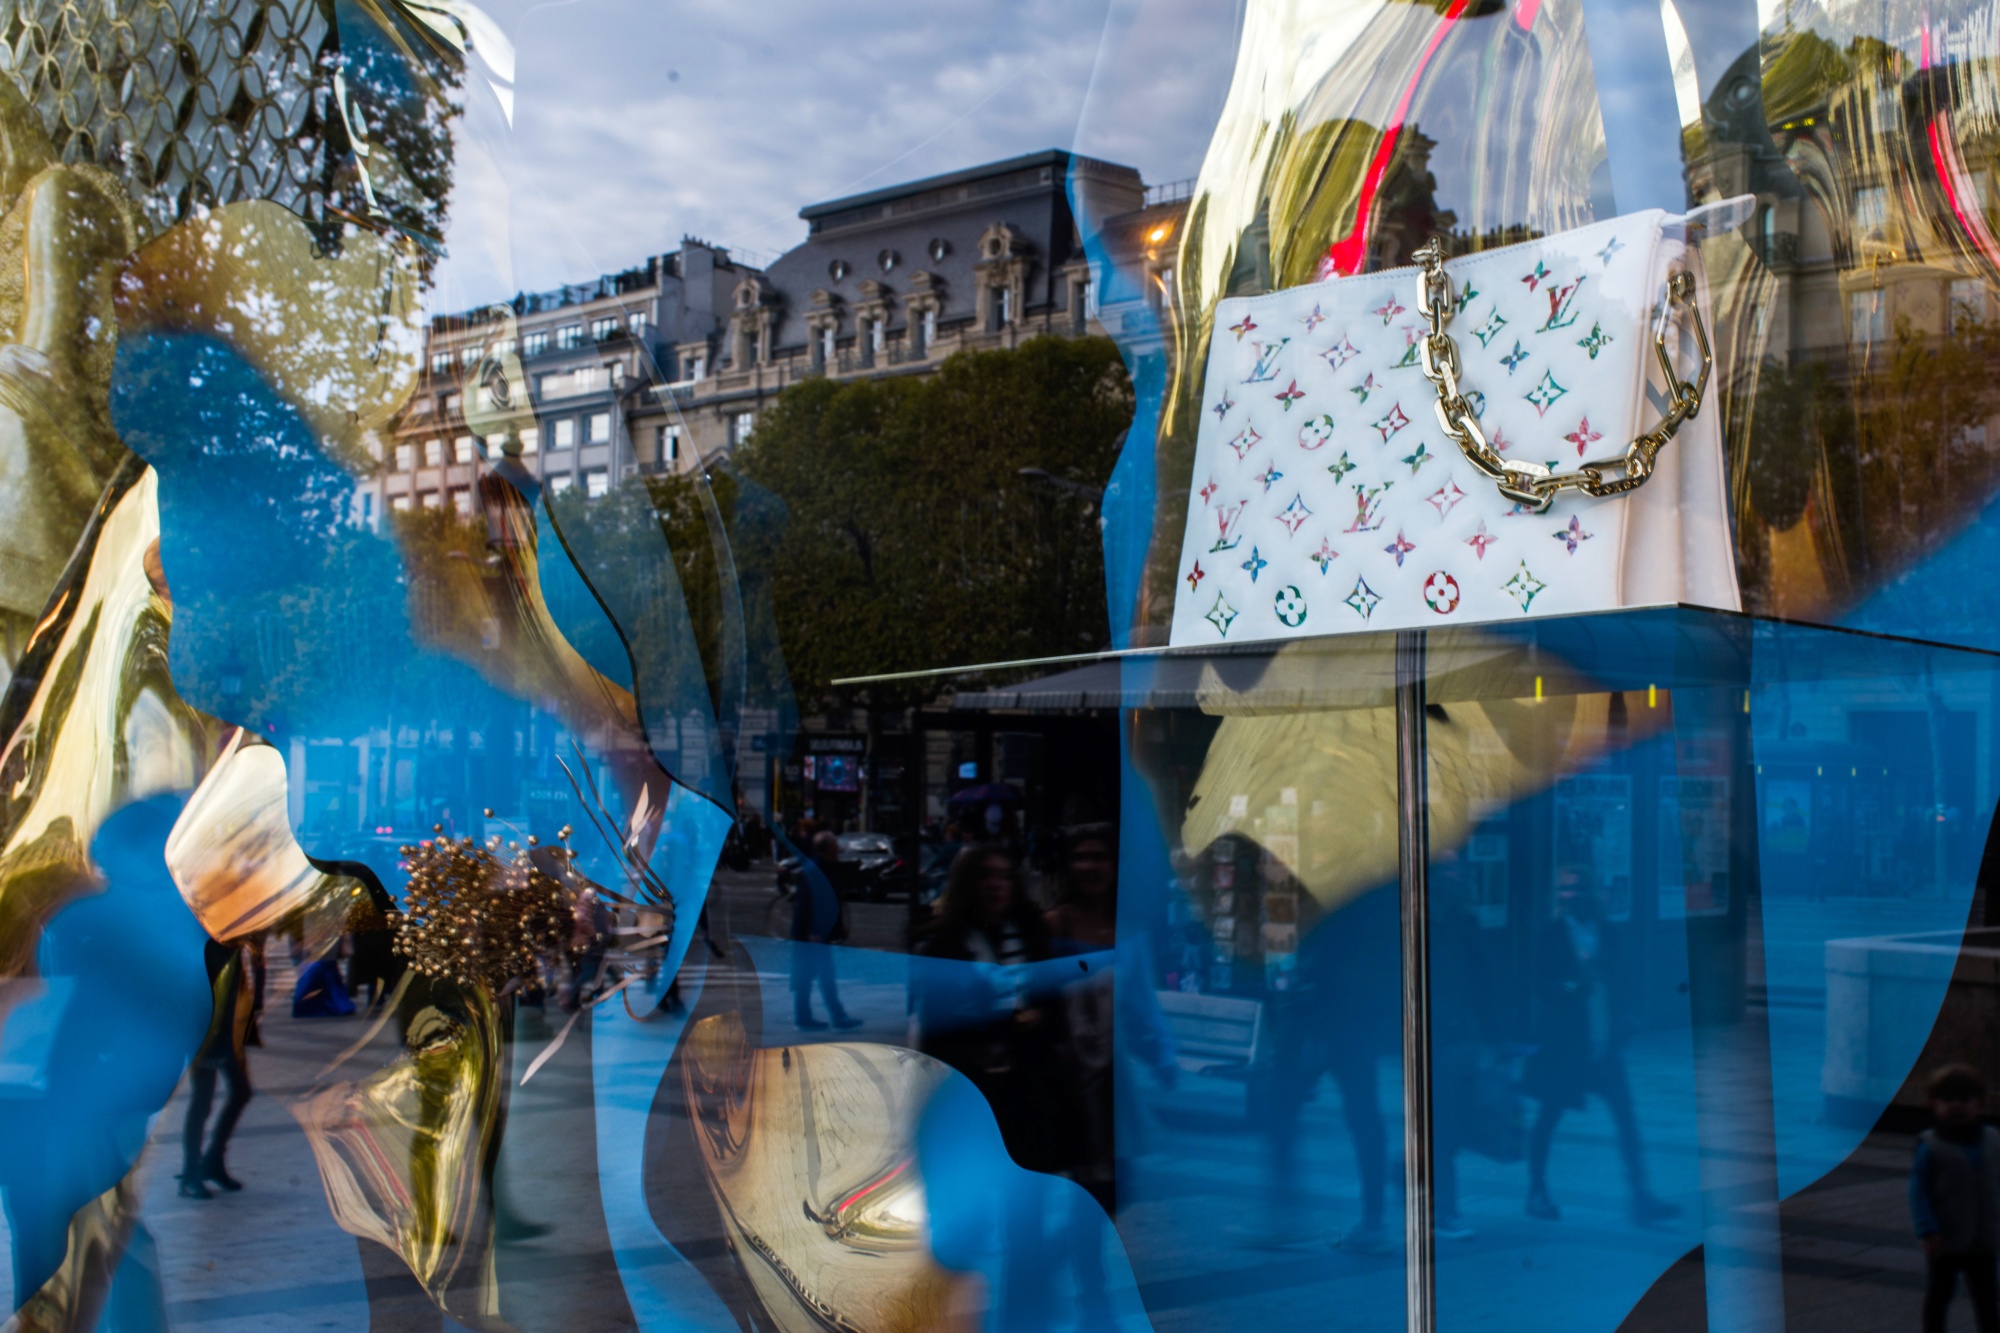 LVMH Stock: Is The Luxury Retailer A Value Play After Earnings?